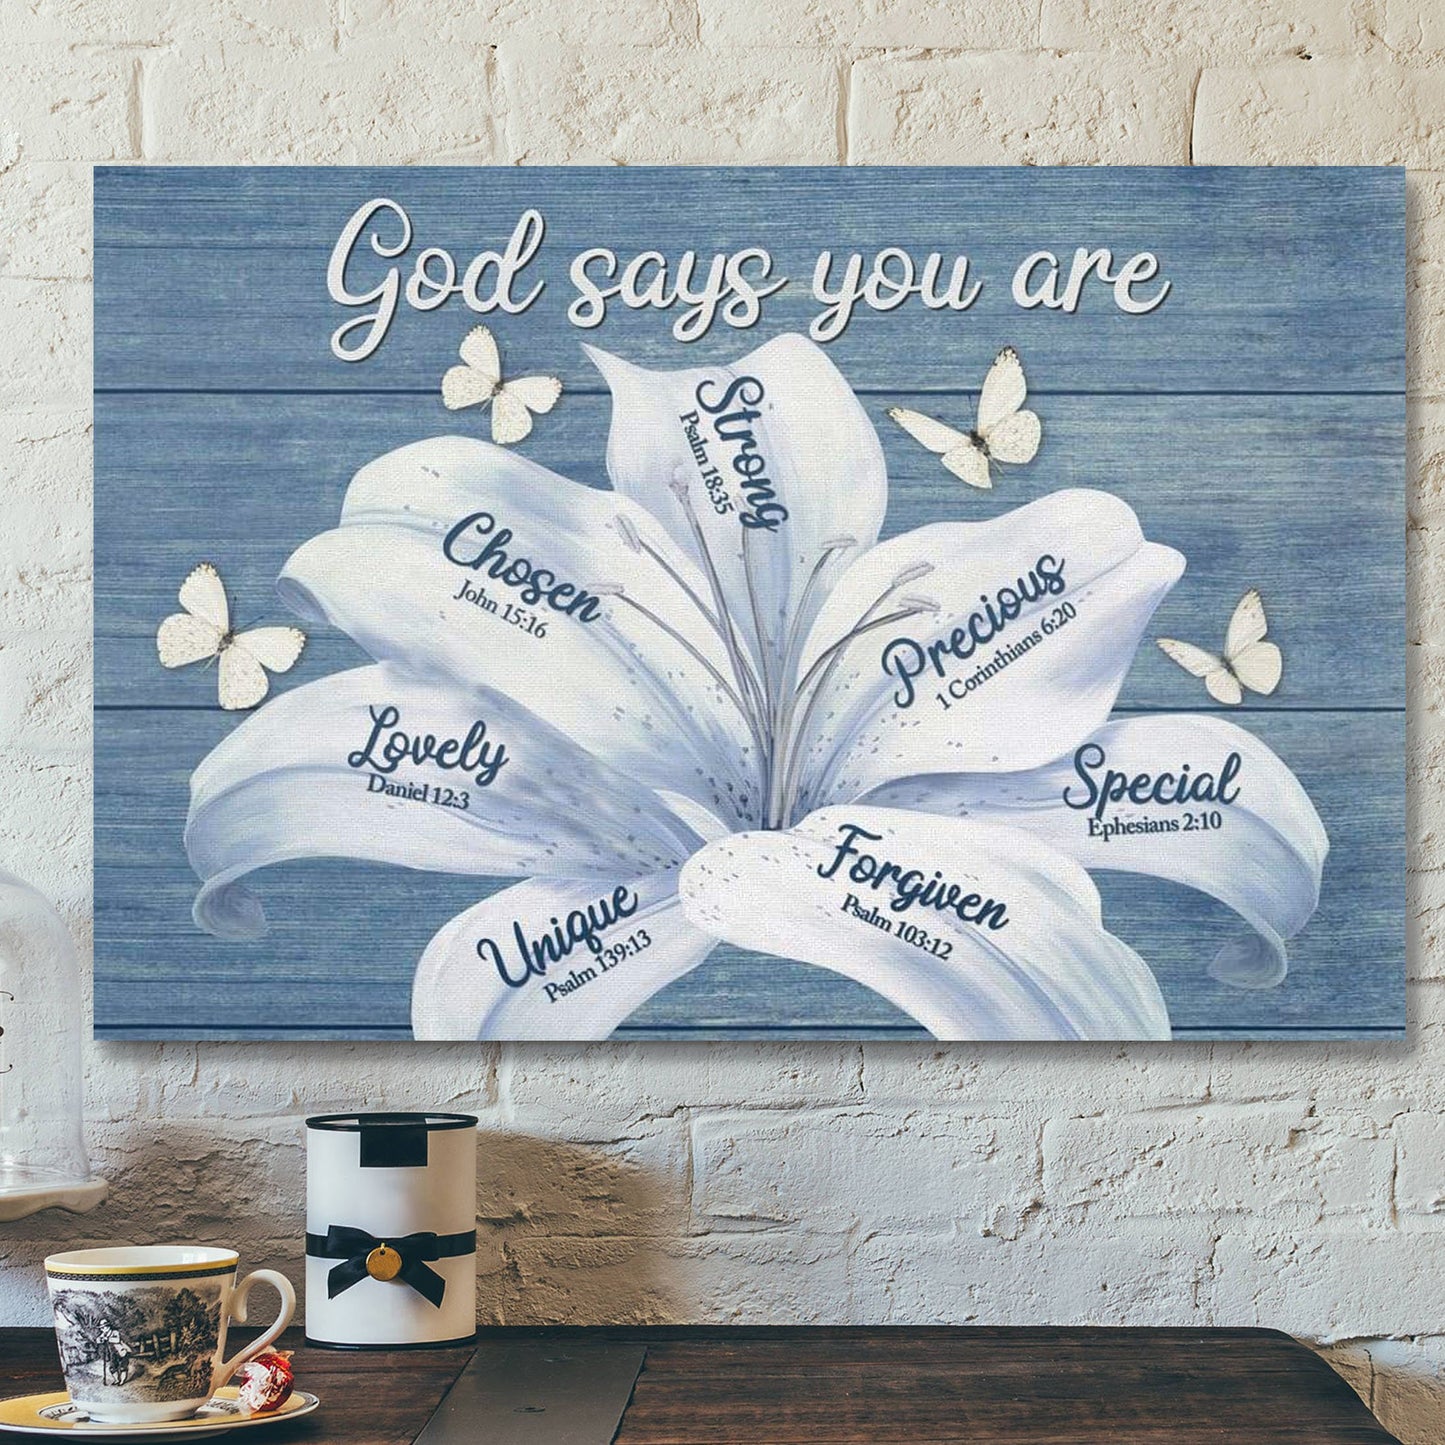 God Canvas Prints - Jesus Canvas Art - White Lily God Says You Are Christian Wall Art Canvas - Ciaocustom